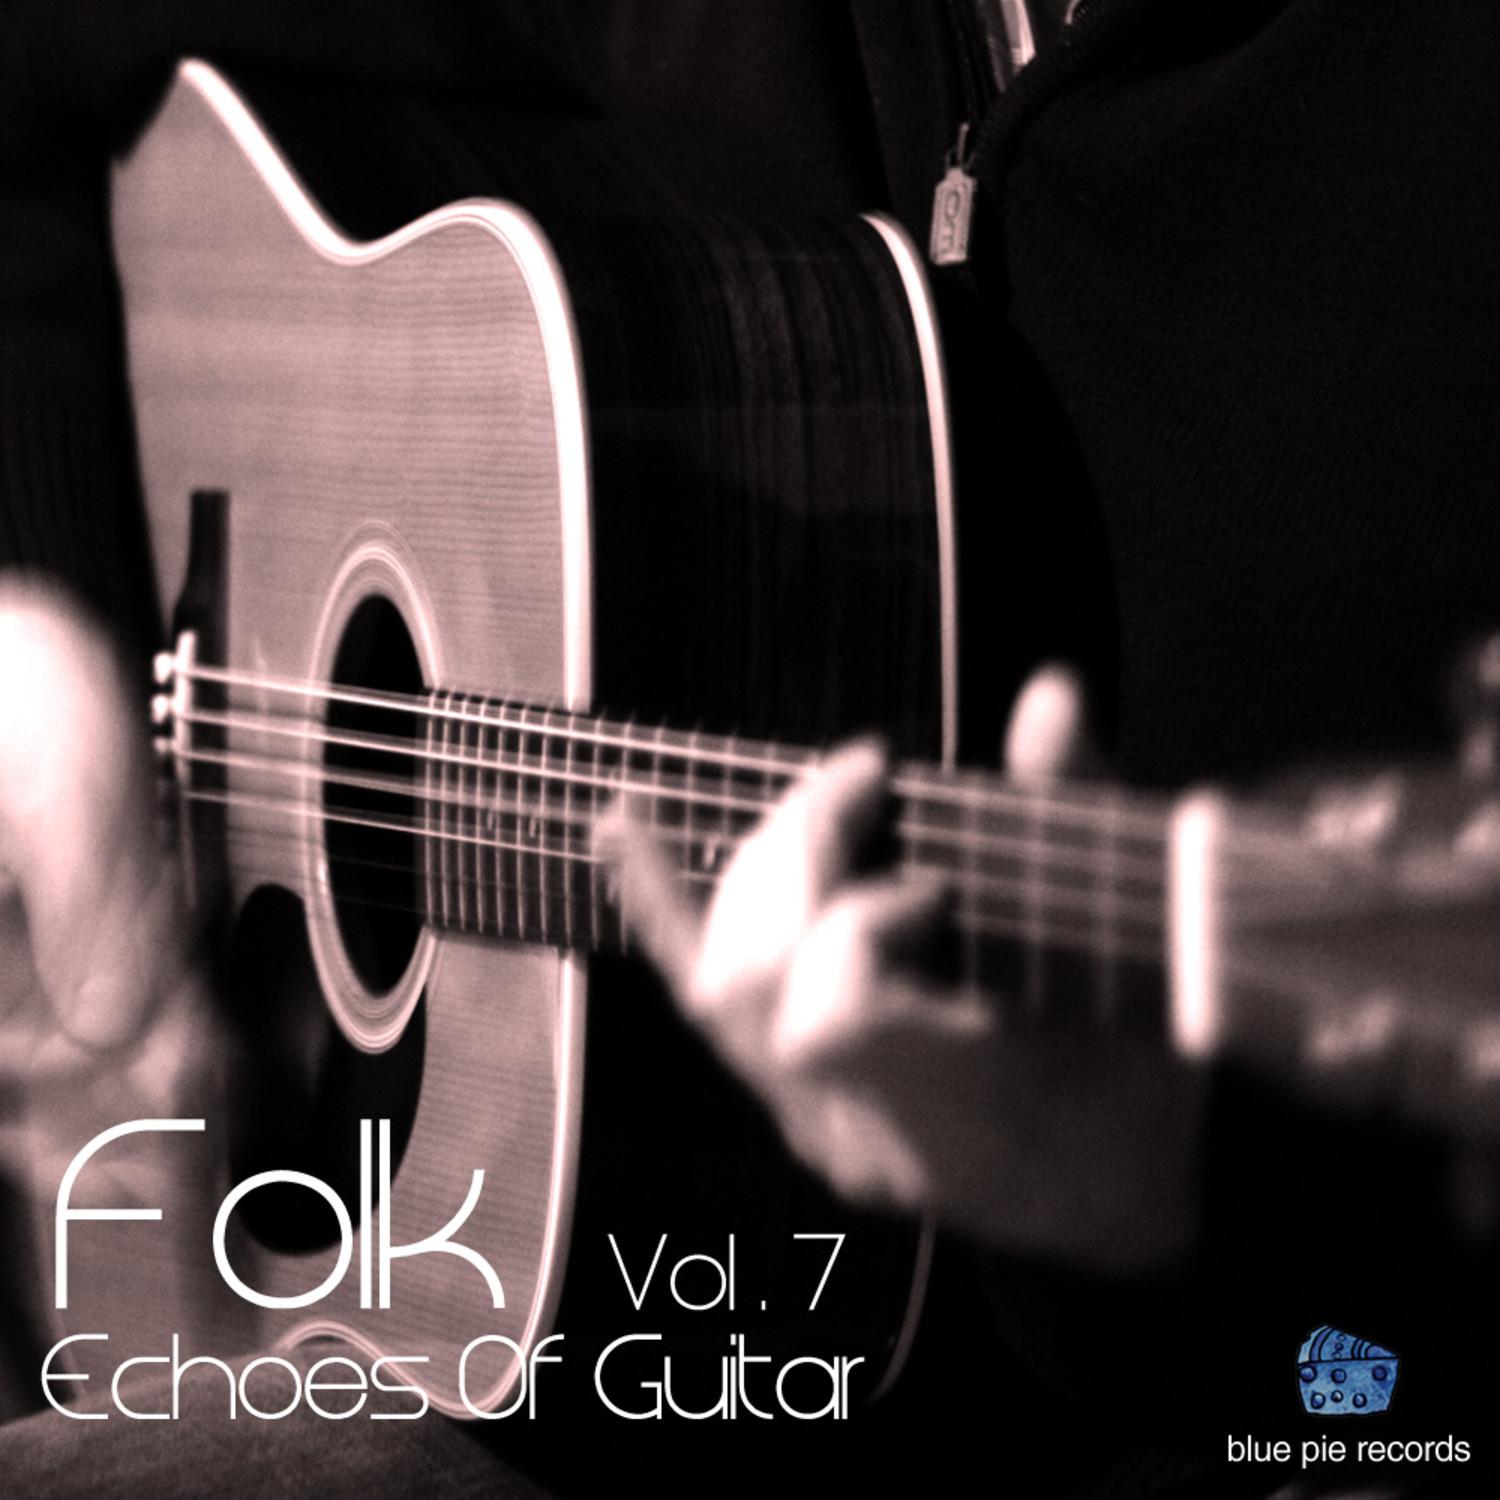 Echoes of Guitar Vol. 7